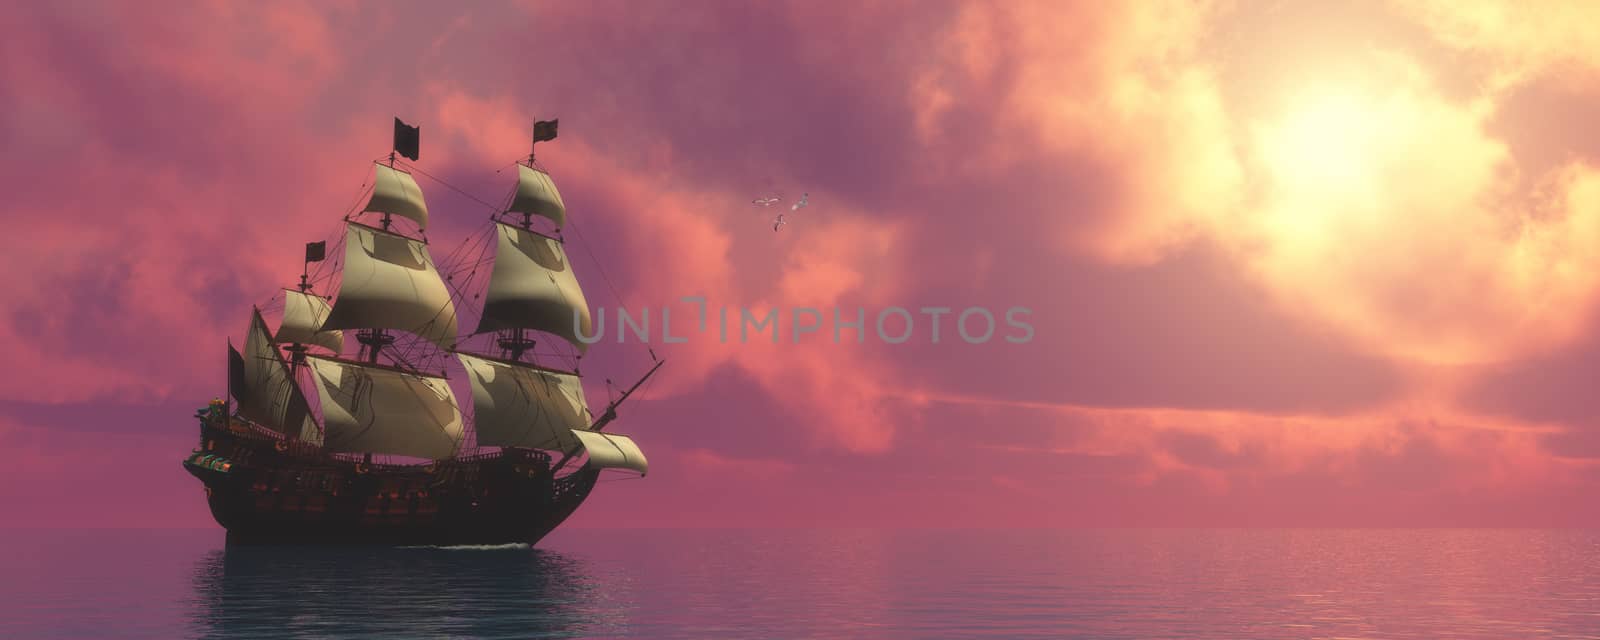 Sunset skies find a galleon ship sailing on rosy ocean waters to a far port destination.